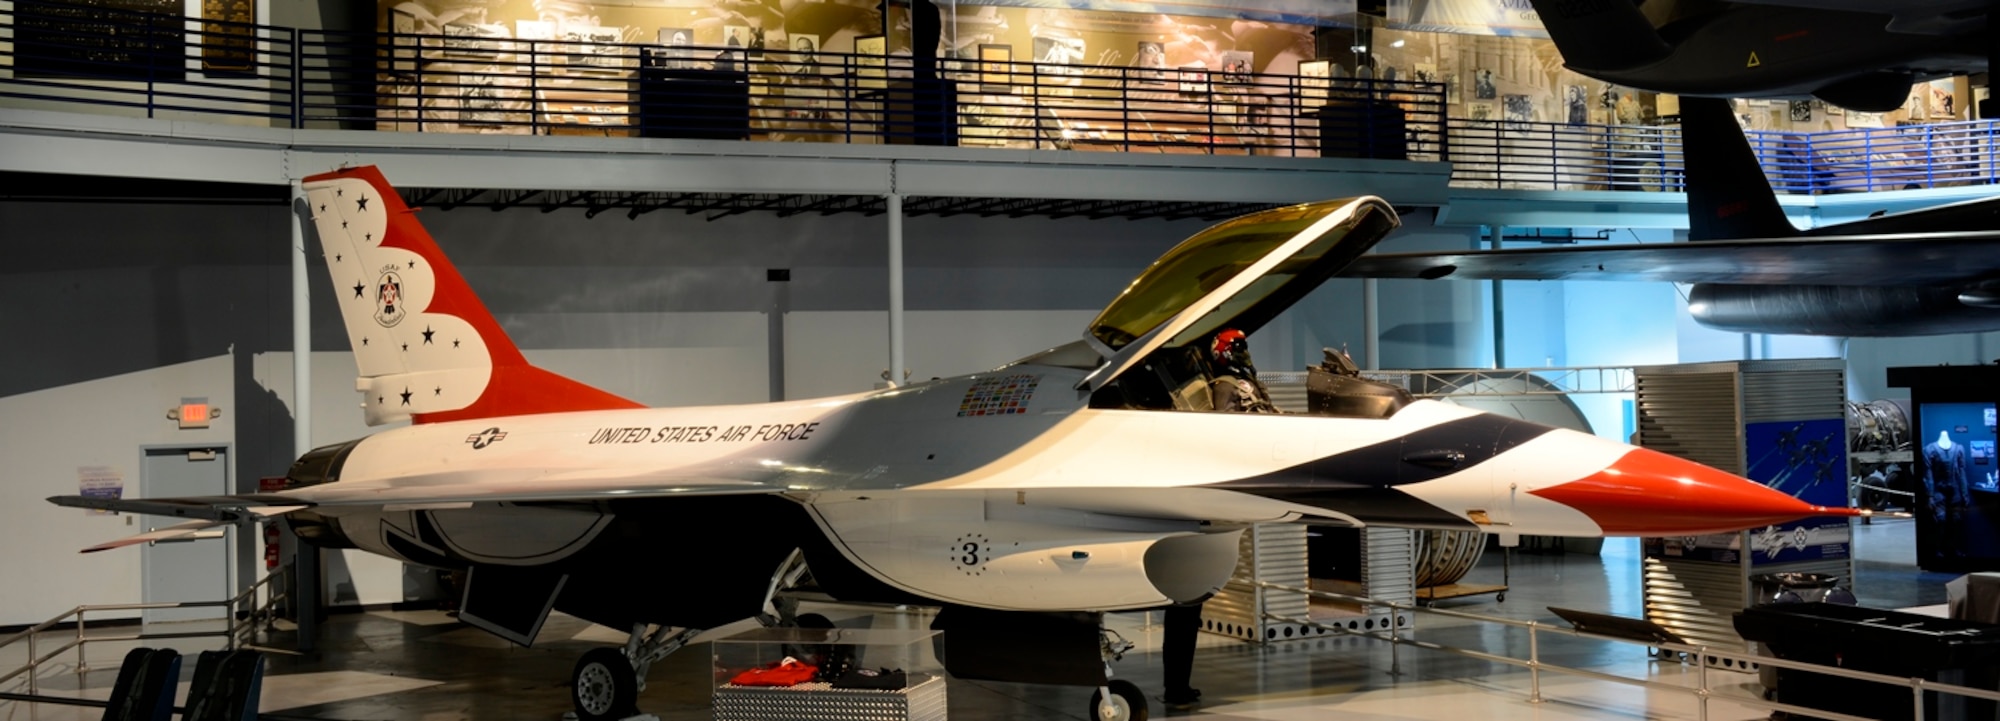 The F-16A model on display was one of the first F-16s to be received by the Thunderbirds in 1982 when they transitioned from T-38s. The Thunderbirds continued to fly this aircraft until 1992 when they converted to F-16Cs. (U.S. Air Force photo by Misuzu Allen)